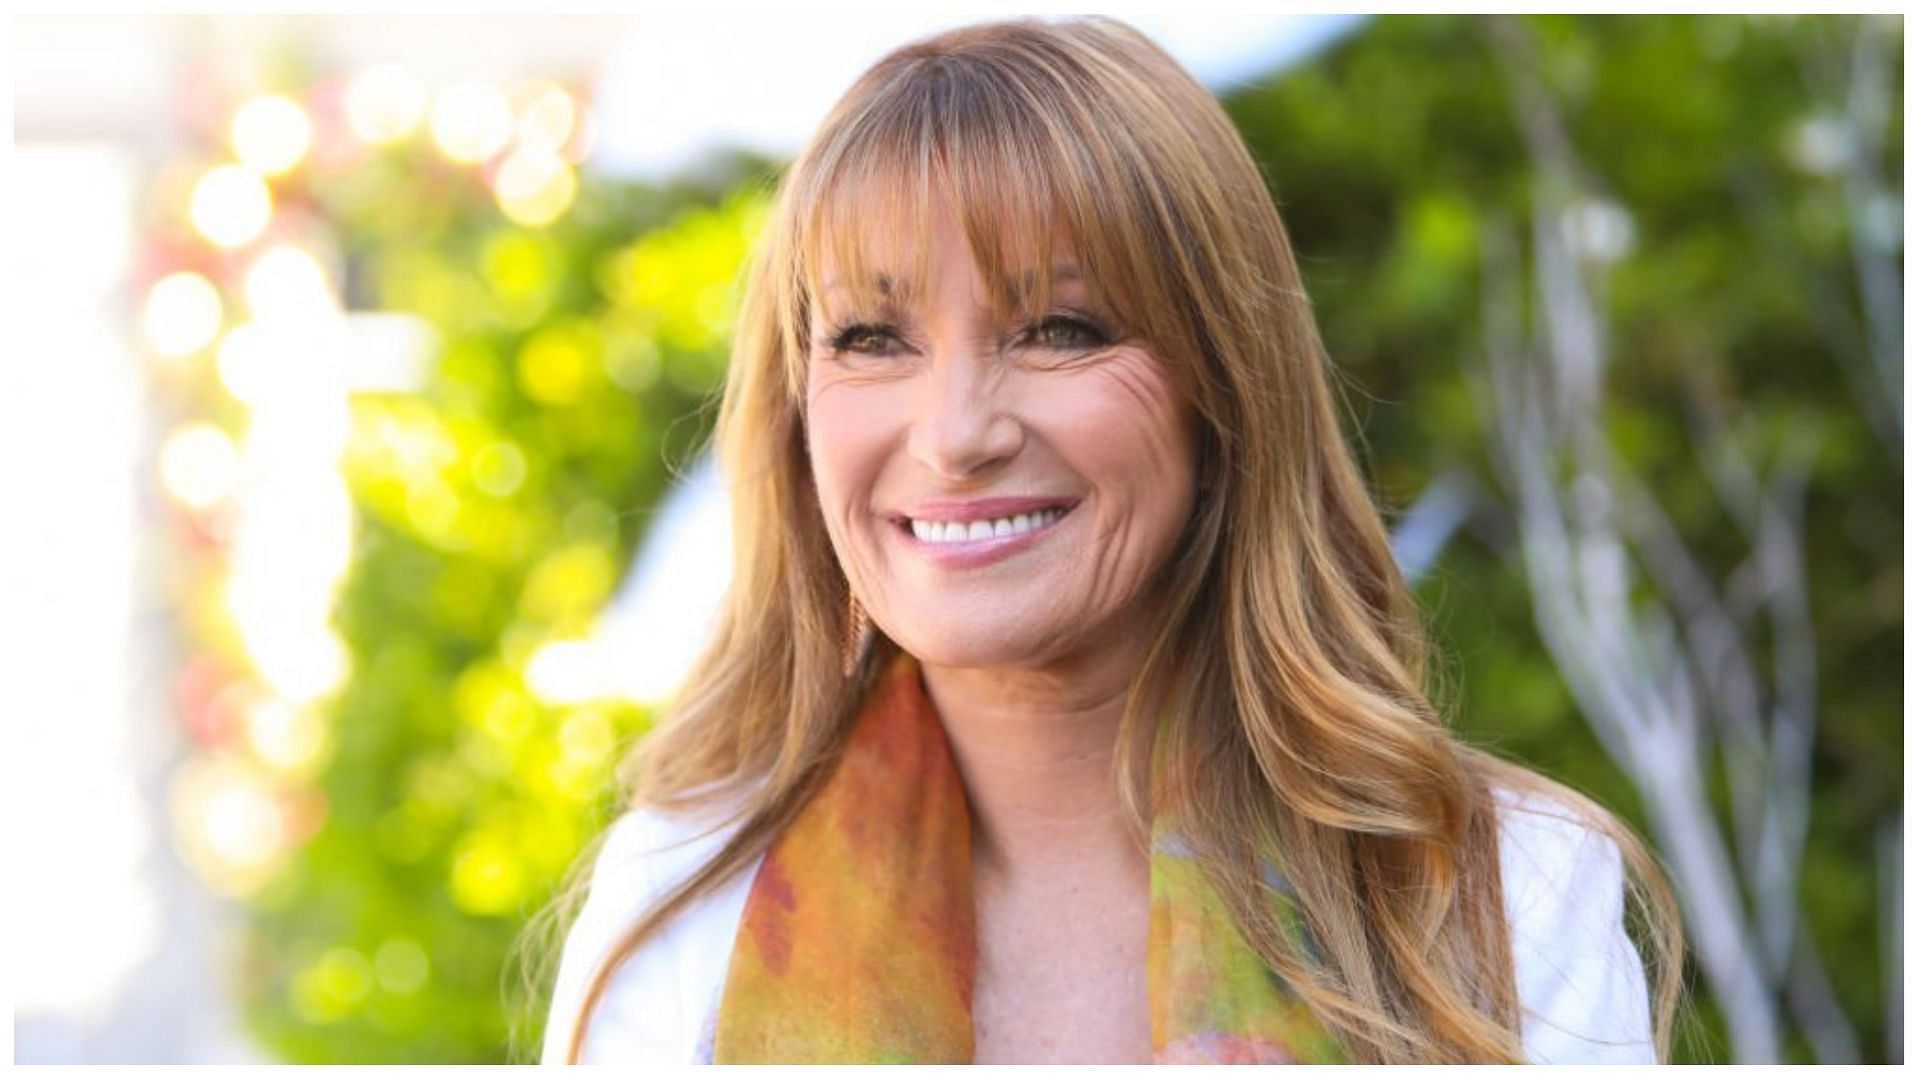 Jane Seymour enjoyed herself at her son&#039;s wedding (Image via Paul Archuleta/Getty Images)